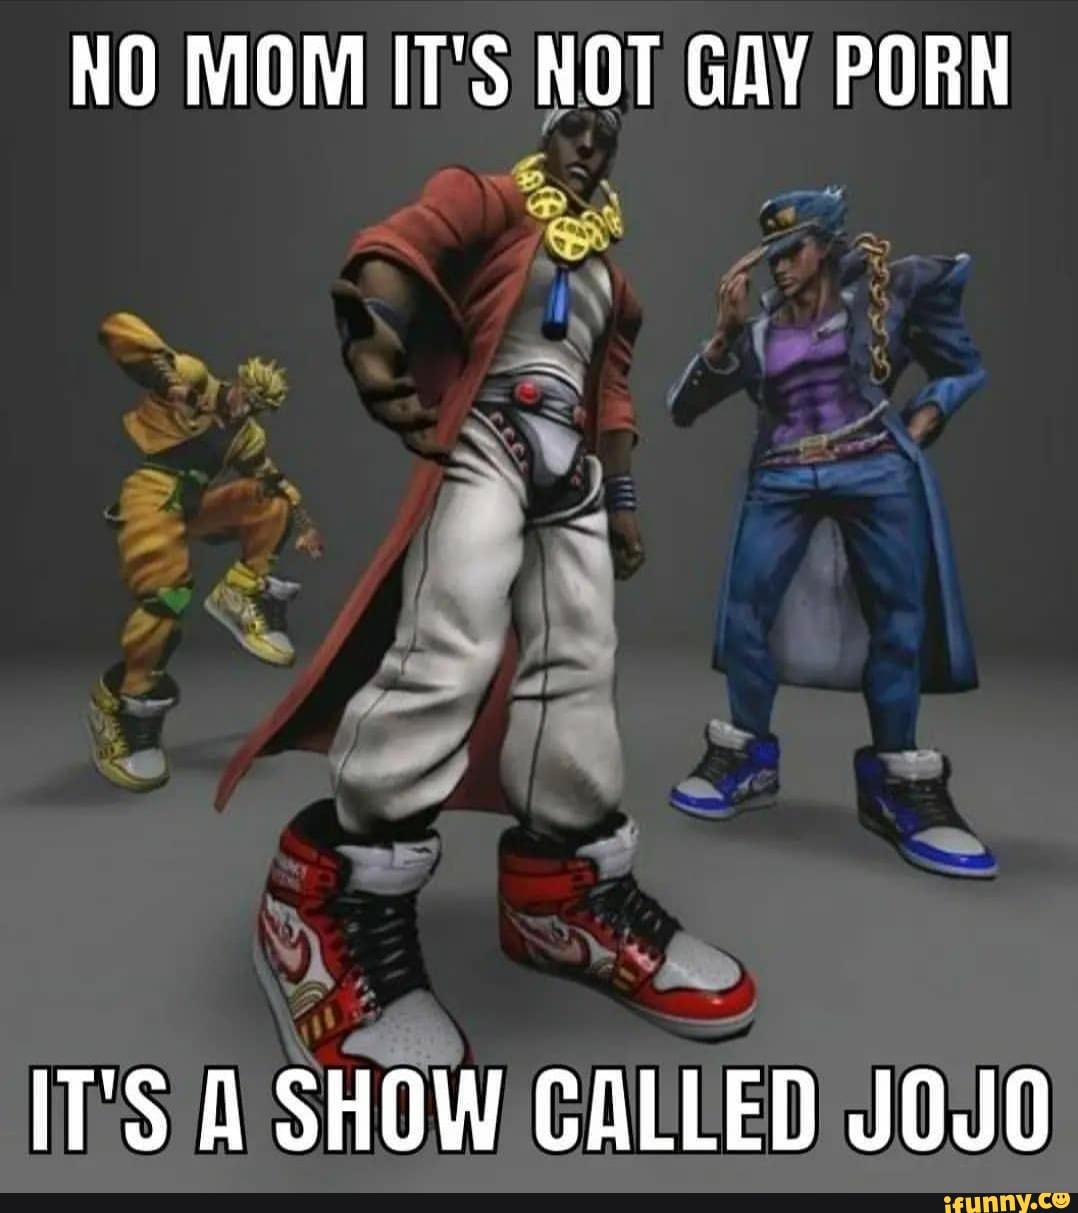 NO MOM IT'S NOT GAY PORN if AM ITS SHOW CALLED JOUO - iFunny Brazil